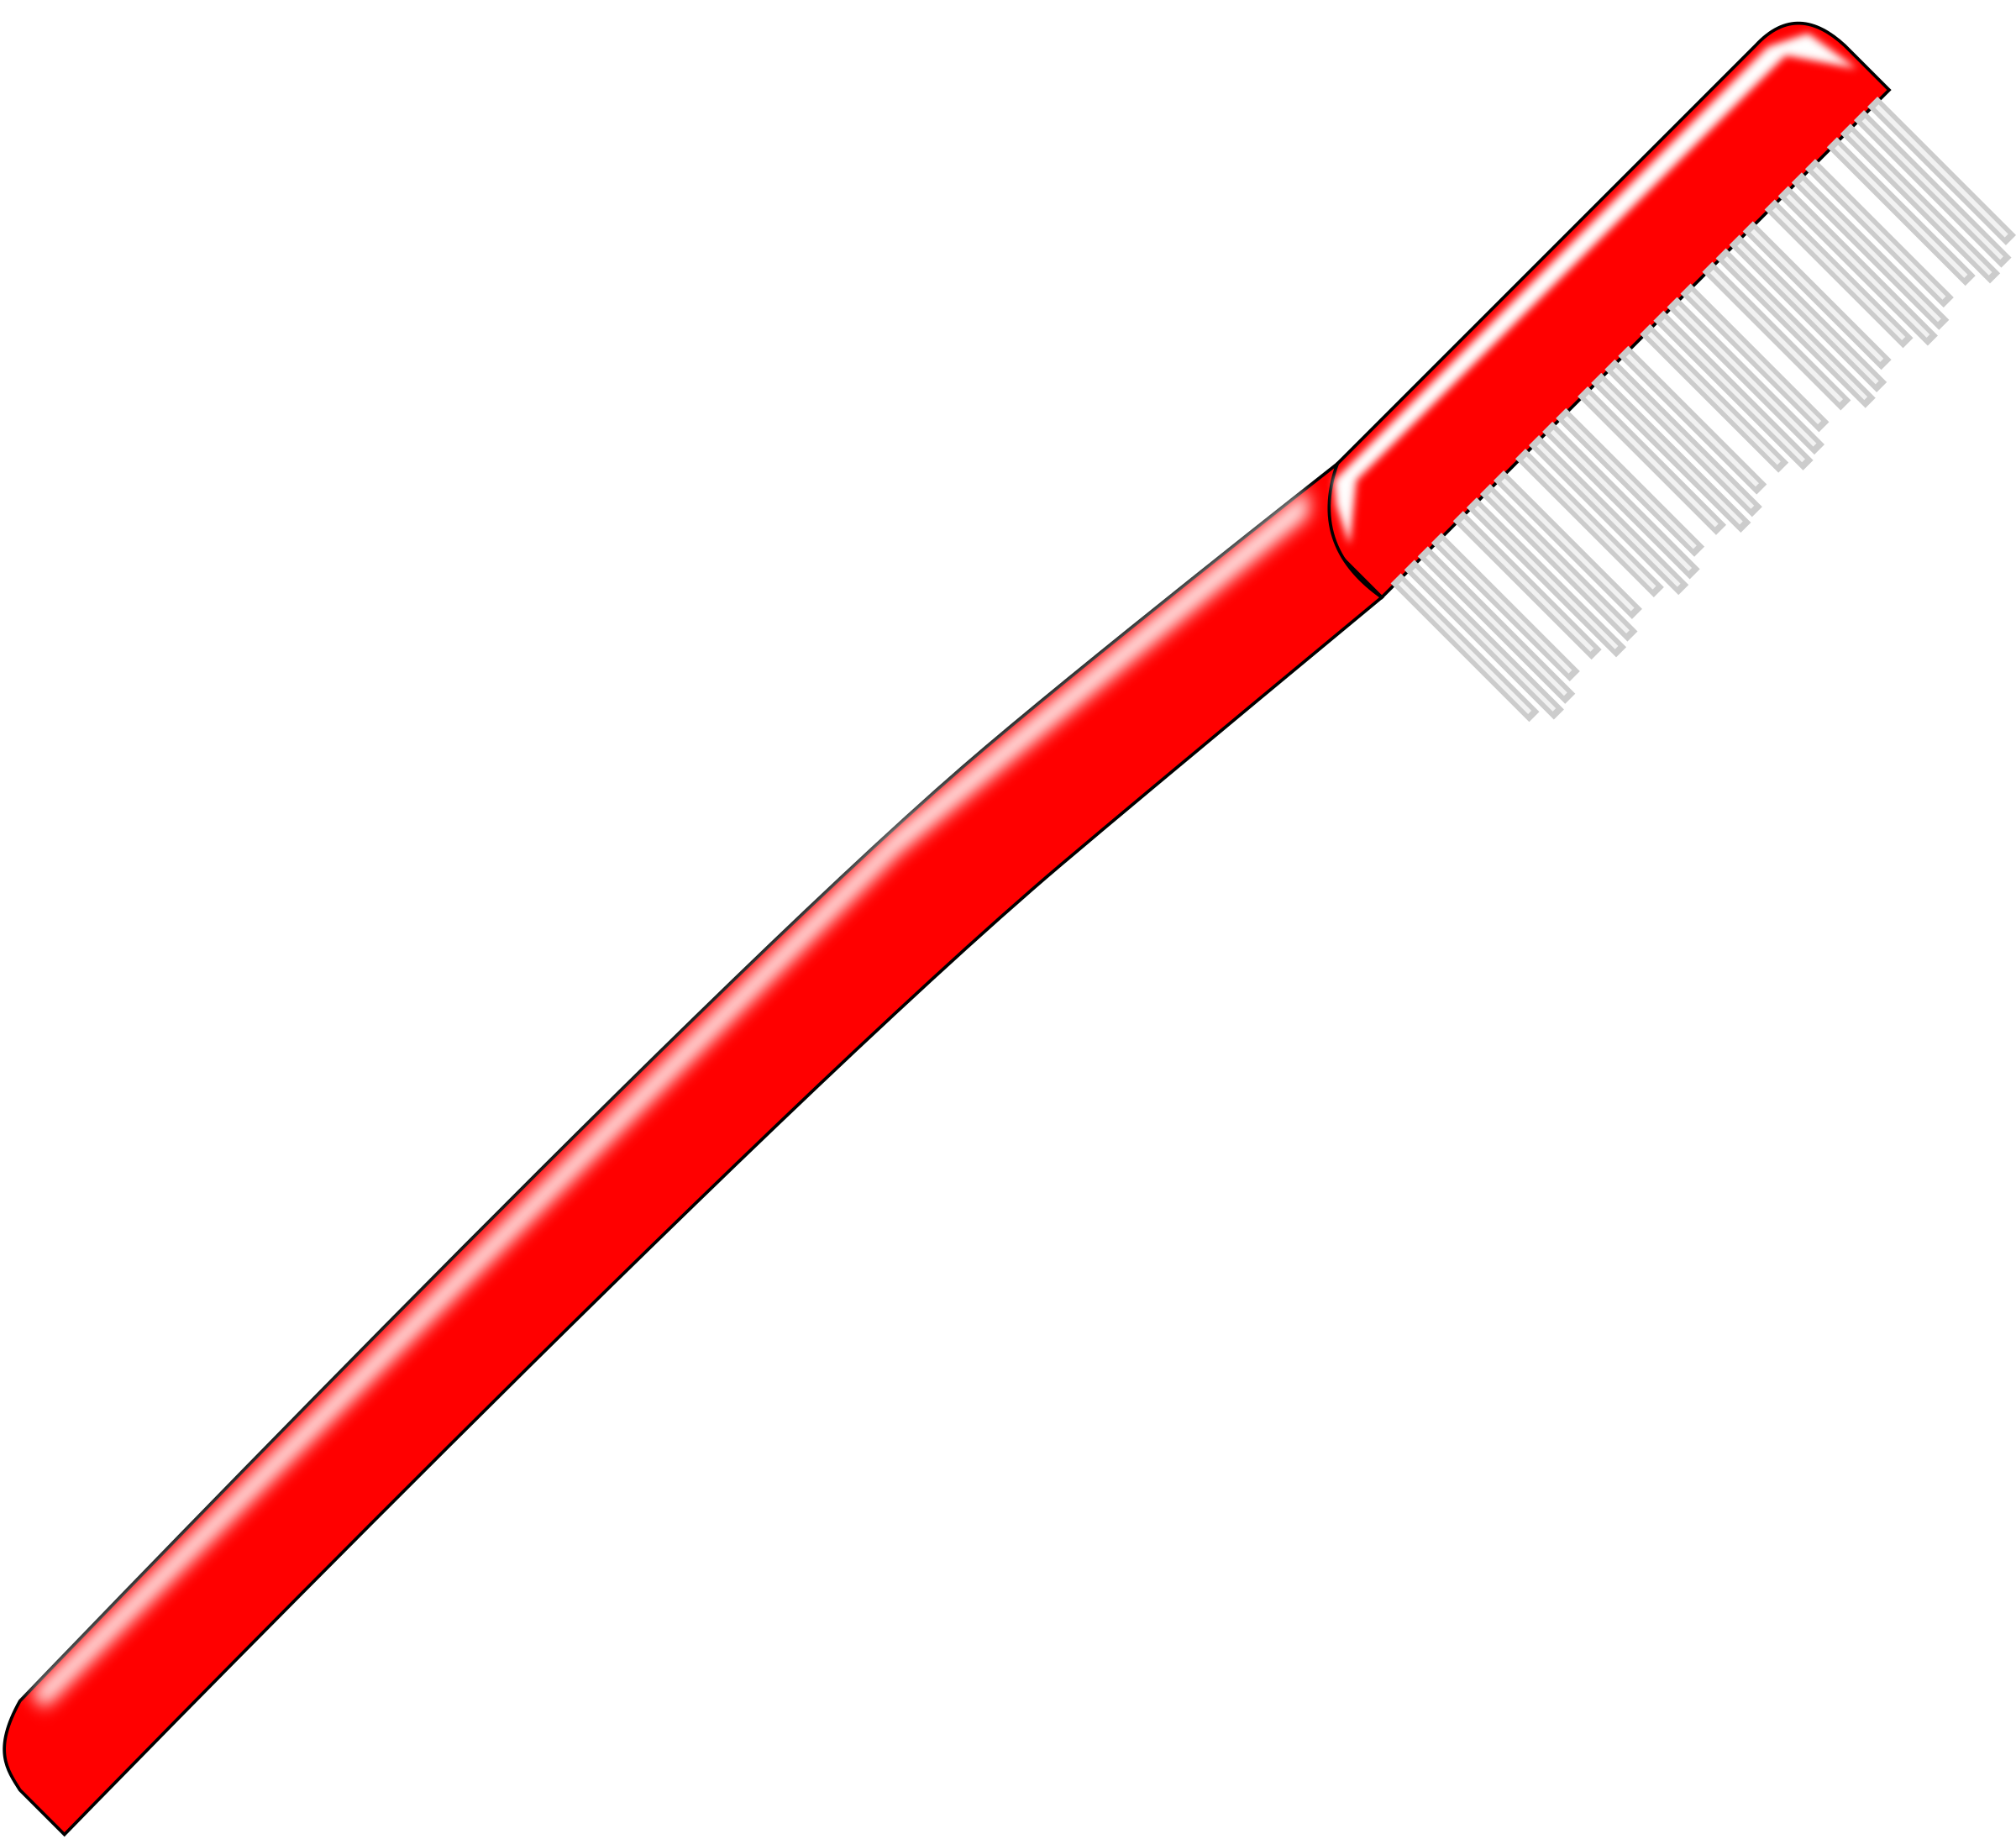 Toothbrush PNG Transparent Images | PNG All